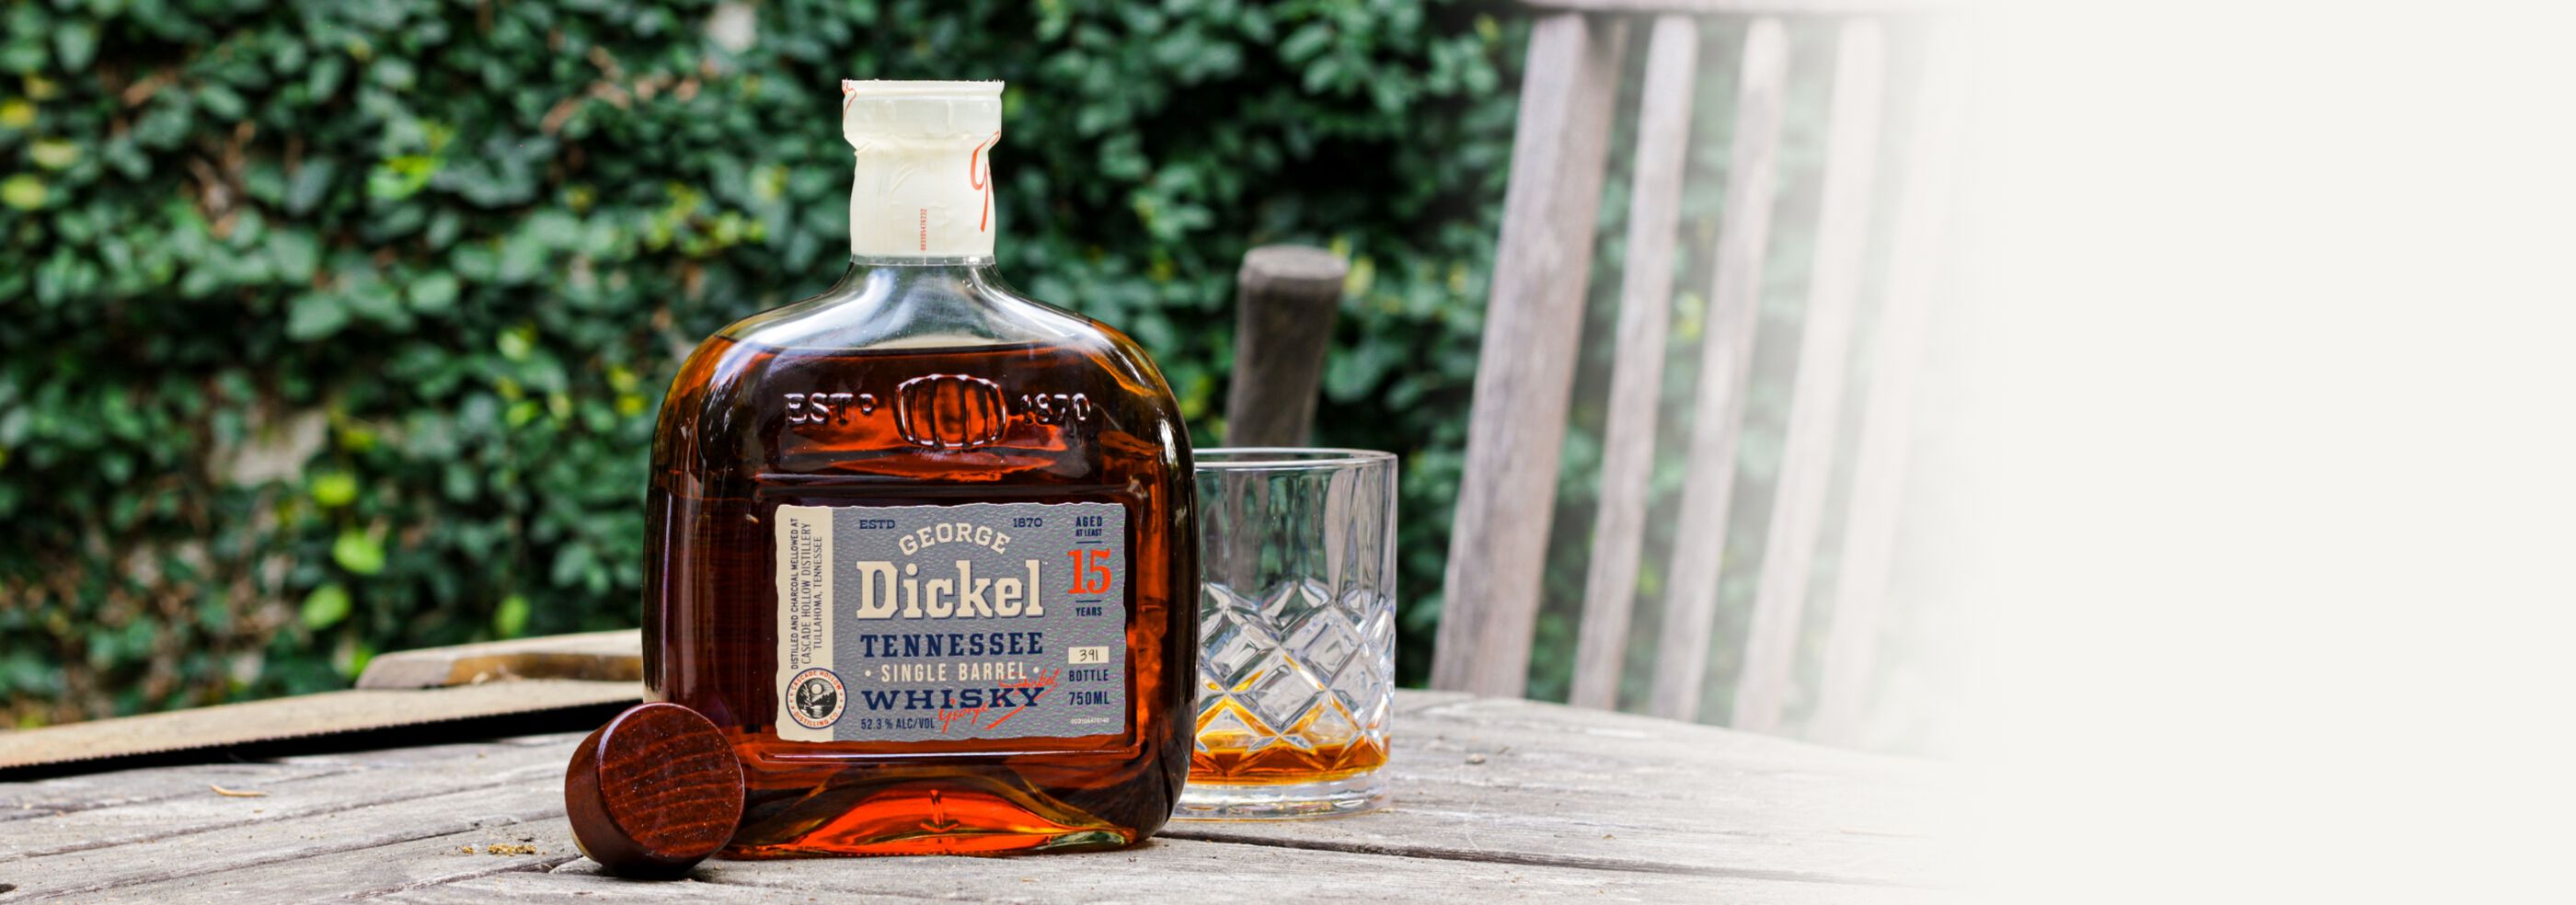 Bottle of George Dickel 15 Year Old Single Barrel S2B28 with rocks glass witting on a table outside